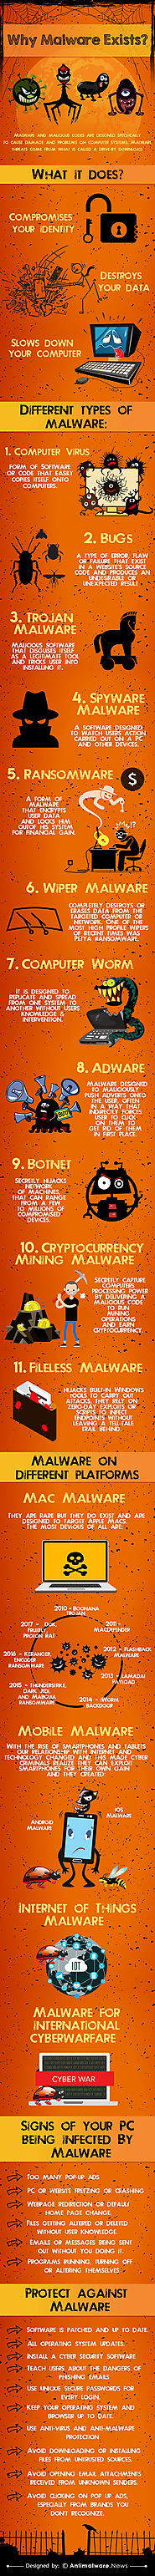 Different Types of Malware